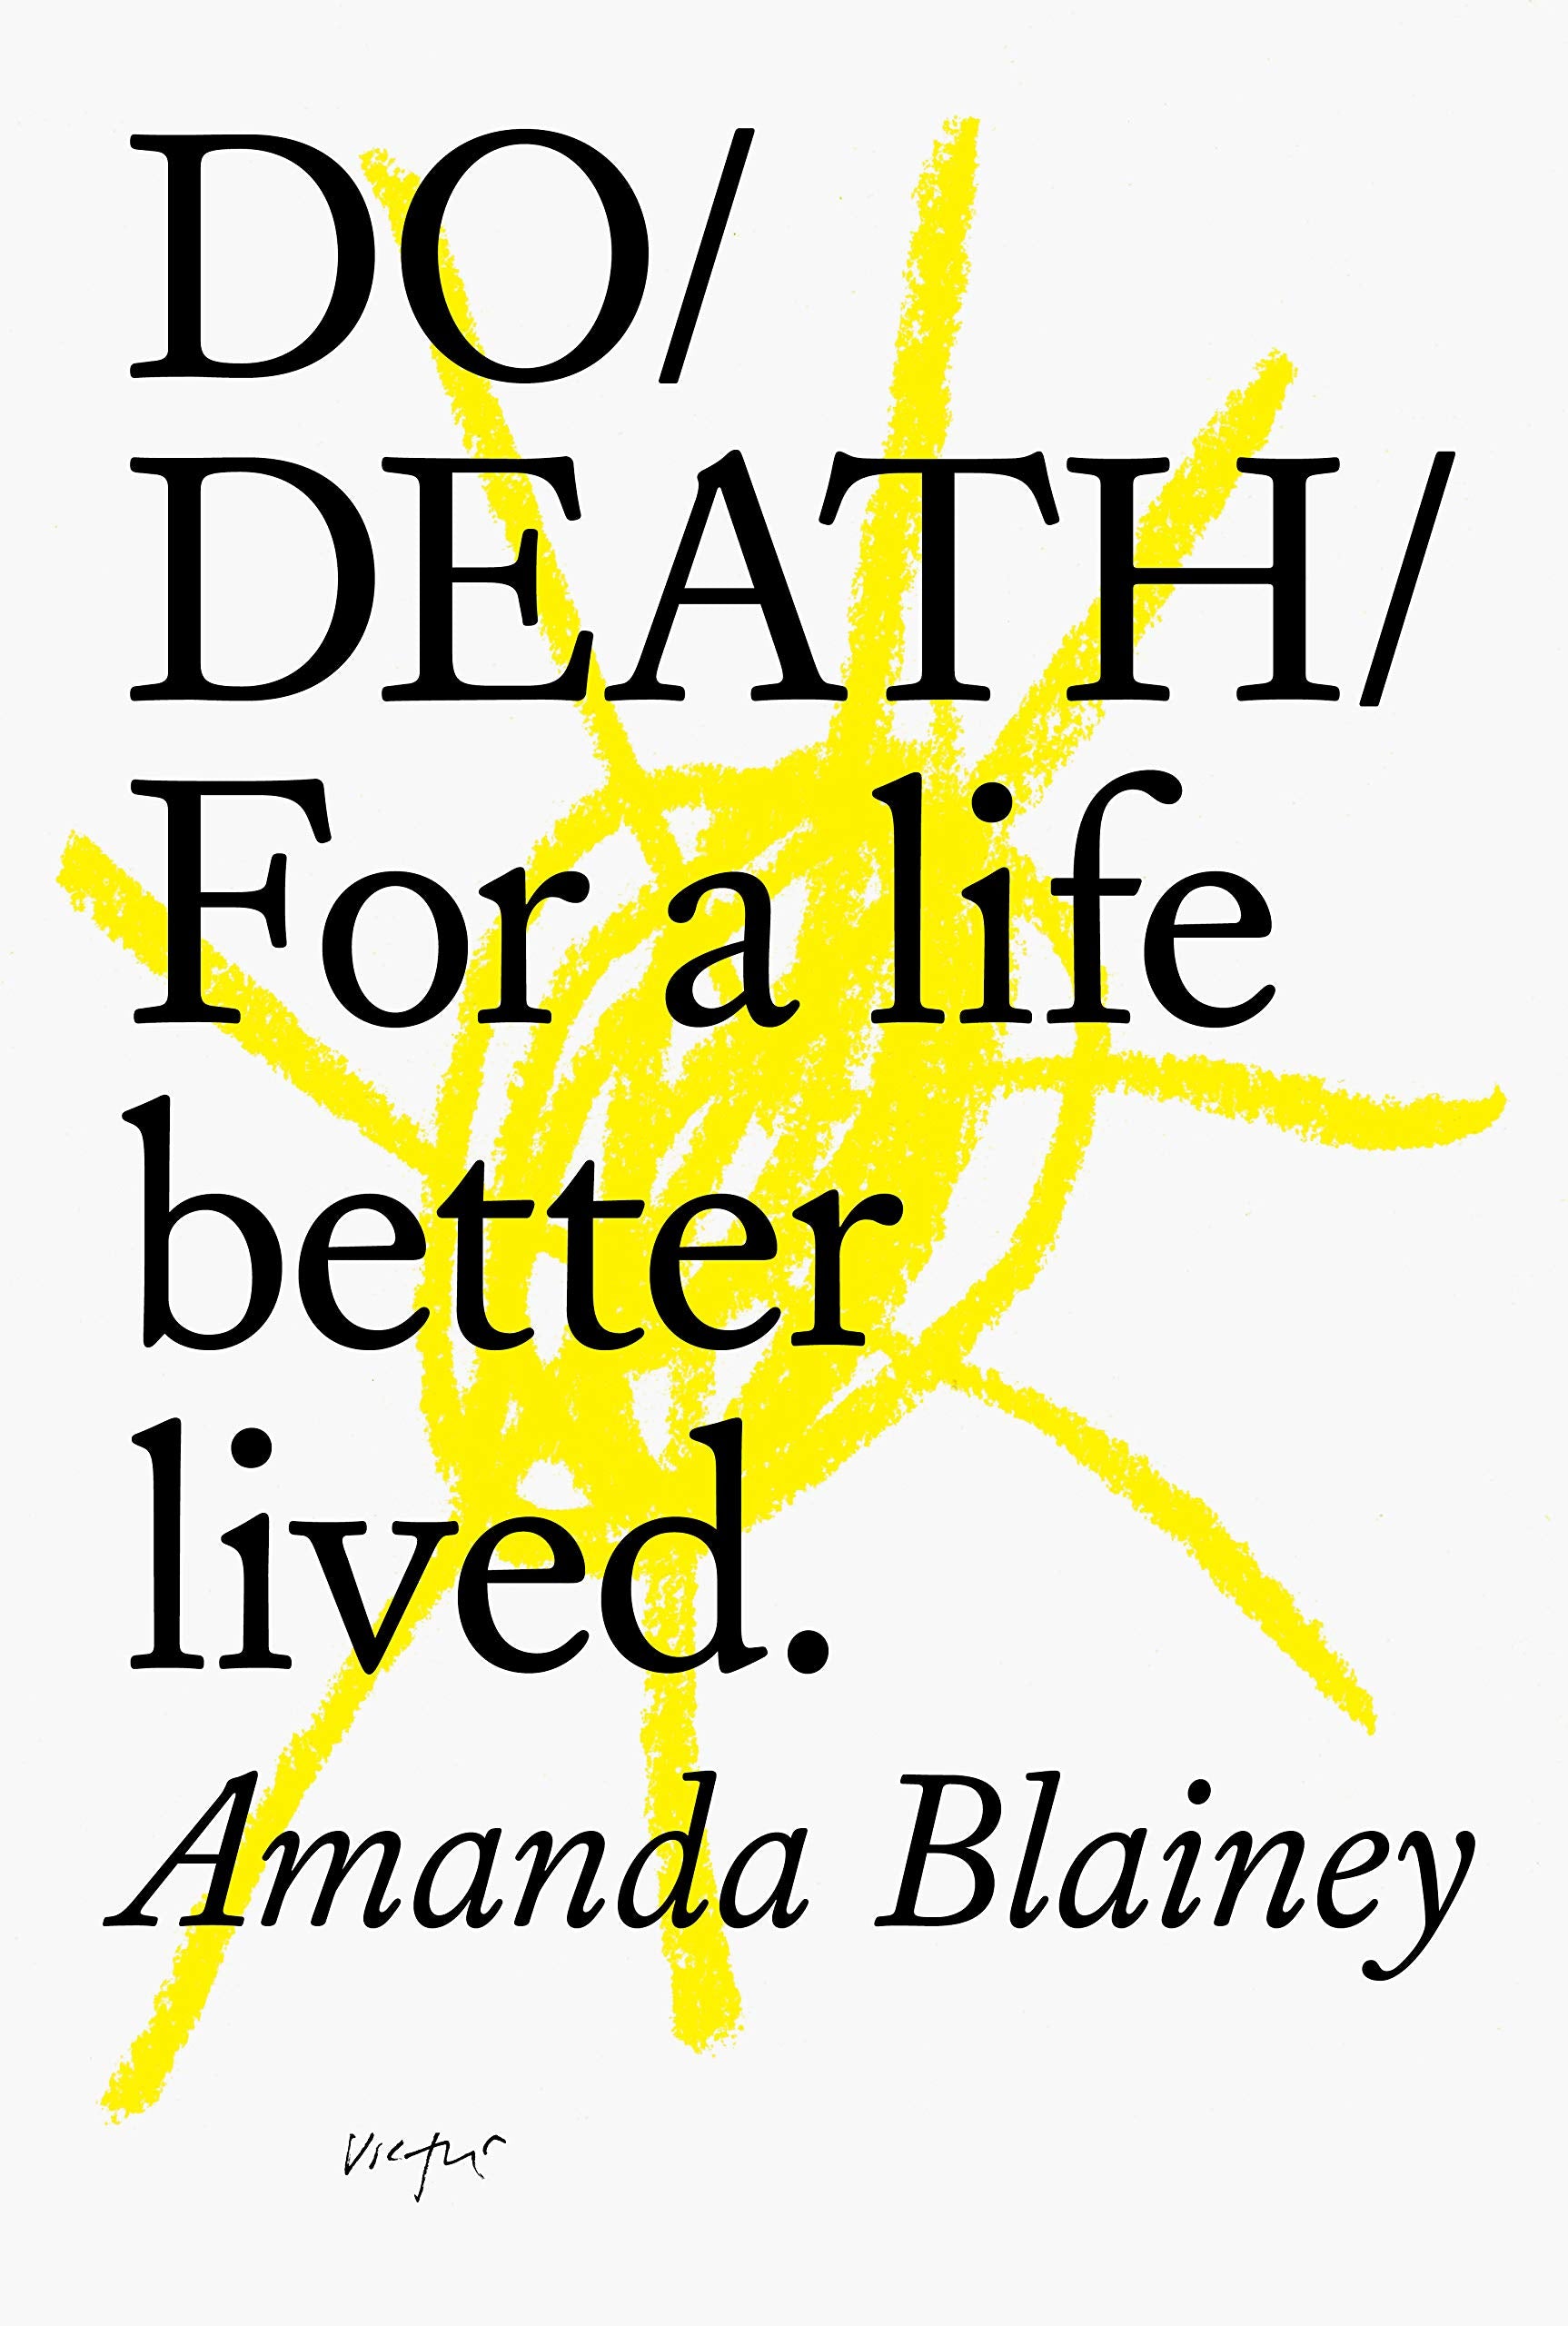 Do Death: For a Life Better Lived